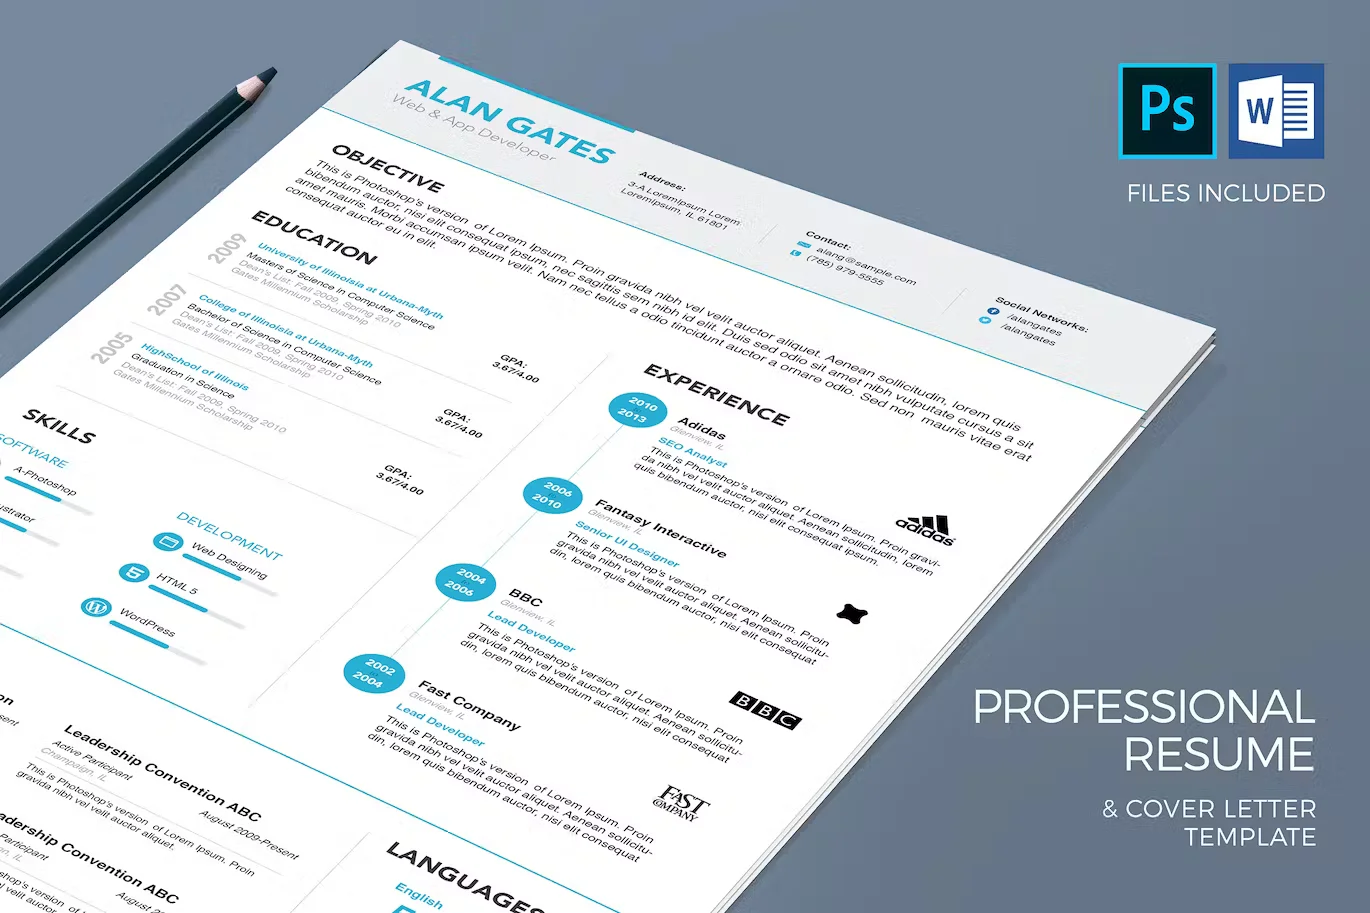 Simple Resume & Cover Letter Template